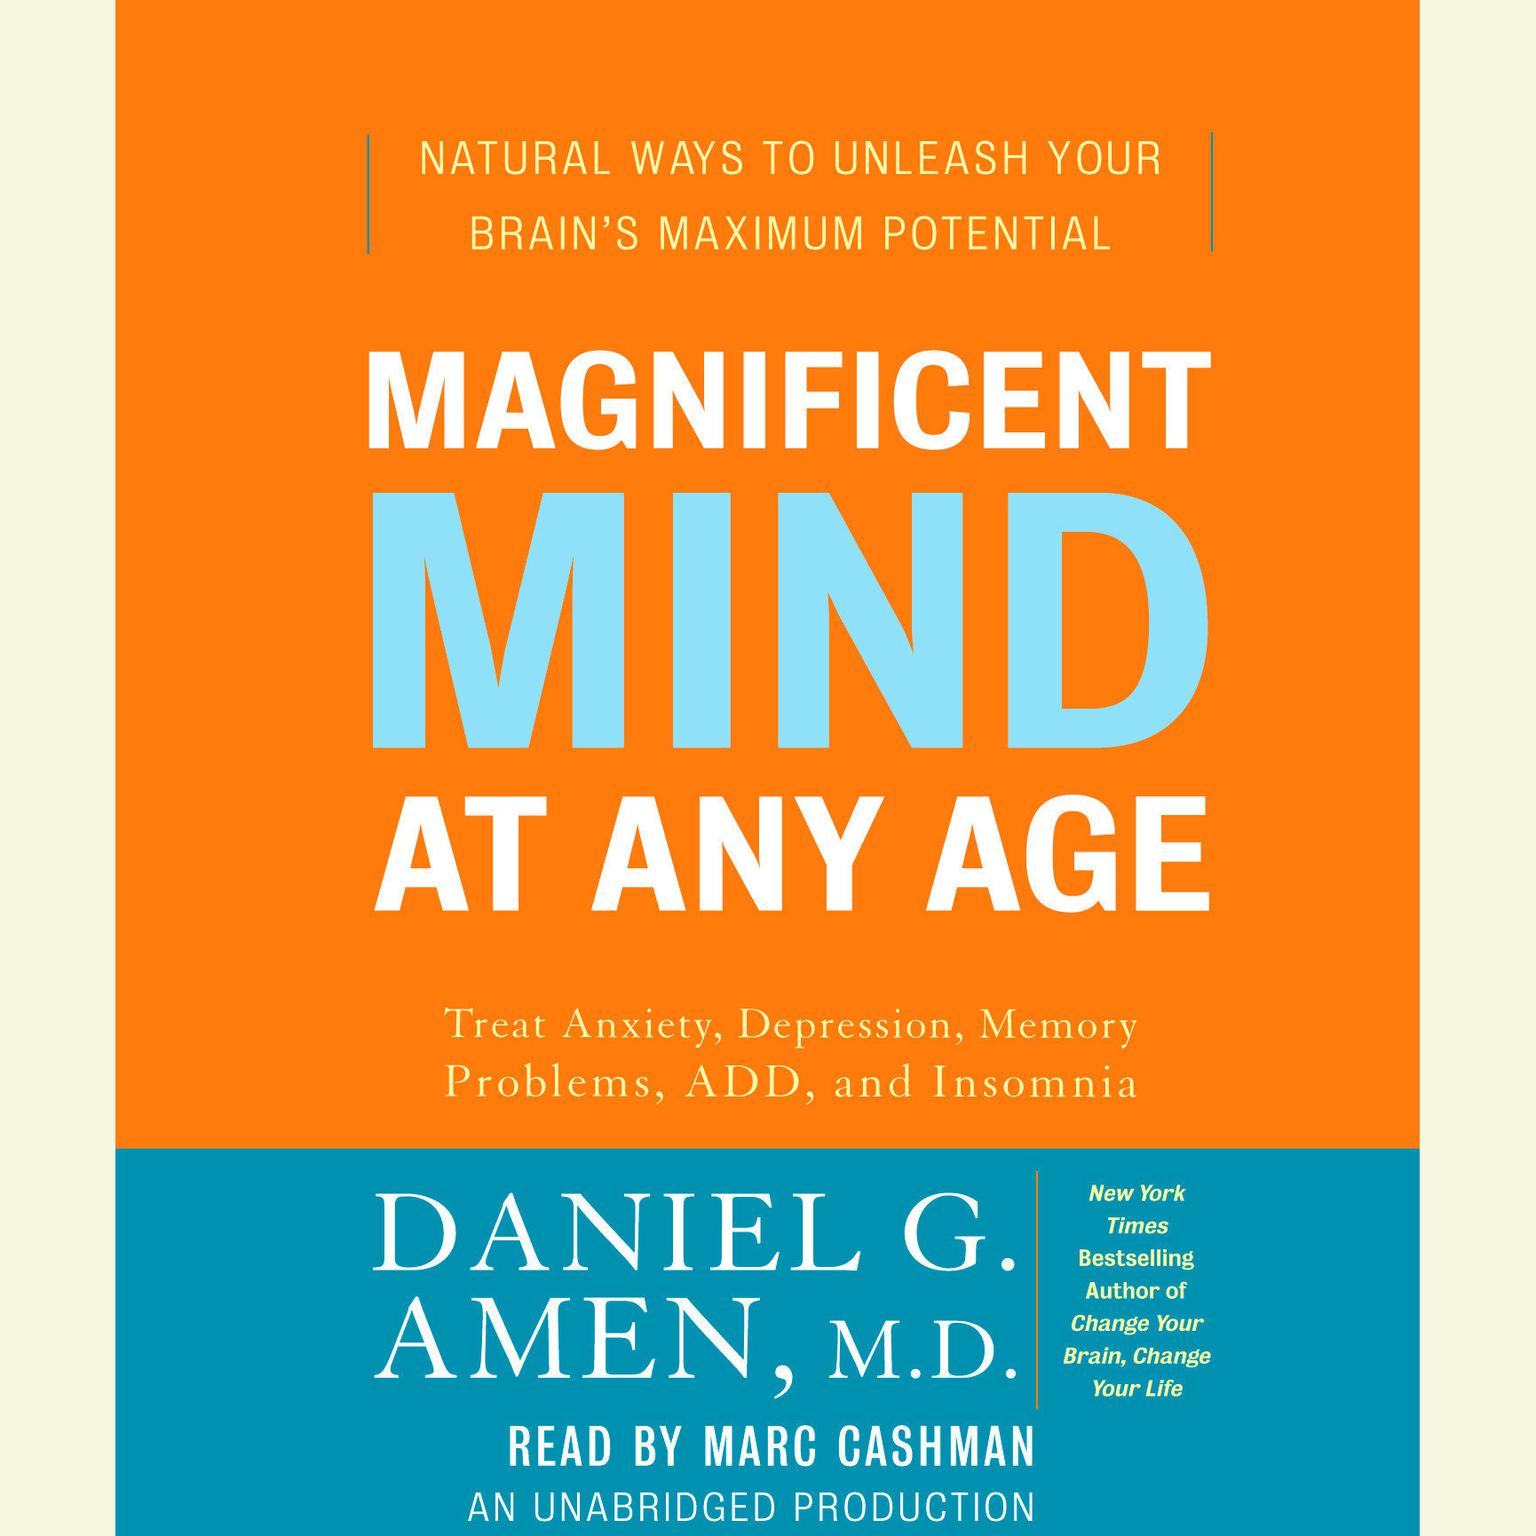 Magnificent Mind at Any Age: Natural Ways to Unleash Your Brains Maximum Potential Audiobook, by Daniel G. Amen